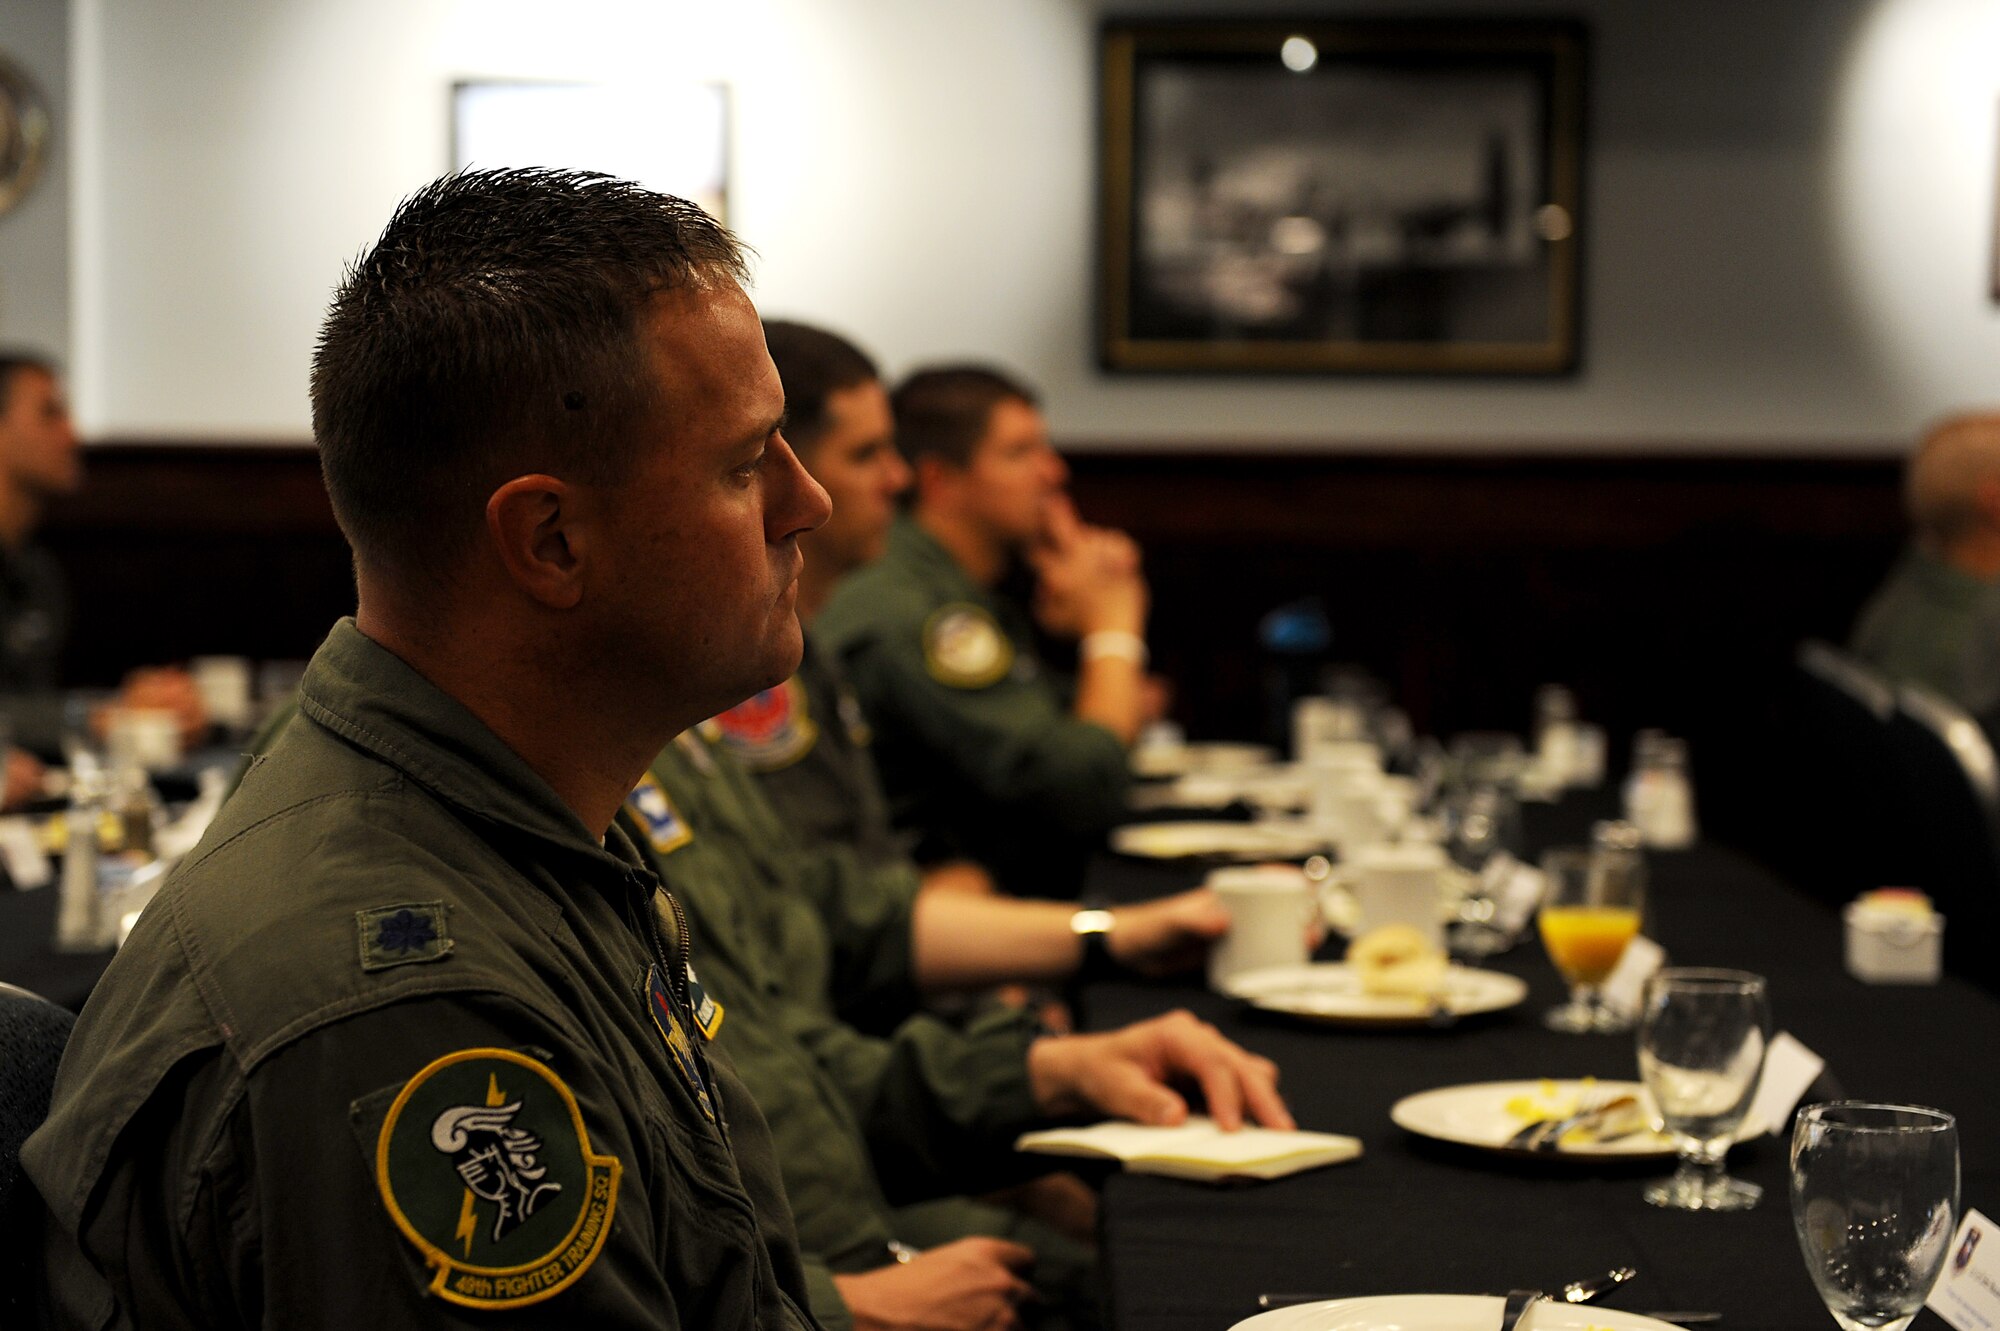 Squadron commanders from the 14th Flying Training Wing listen to Maj. Gen. Patrick Doherty, 19th Air Force commander at Columbus Air Force Base, Mississippi Aug. 6, 2018. Doherty talked about how the 19th Air Force wants to have just as much insight at the squadron level with ongoing problems in order to fix them faster and more efficiently. (U.S. Air Force photo by Airman 1st Class Beaux Hebert)